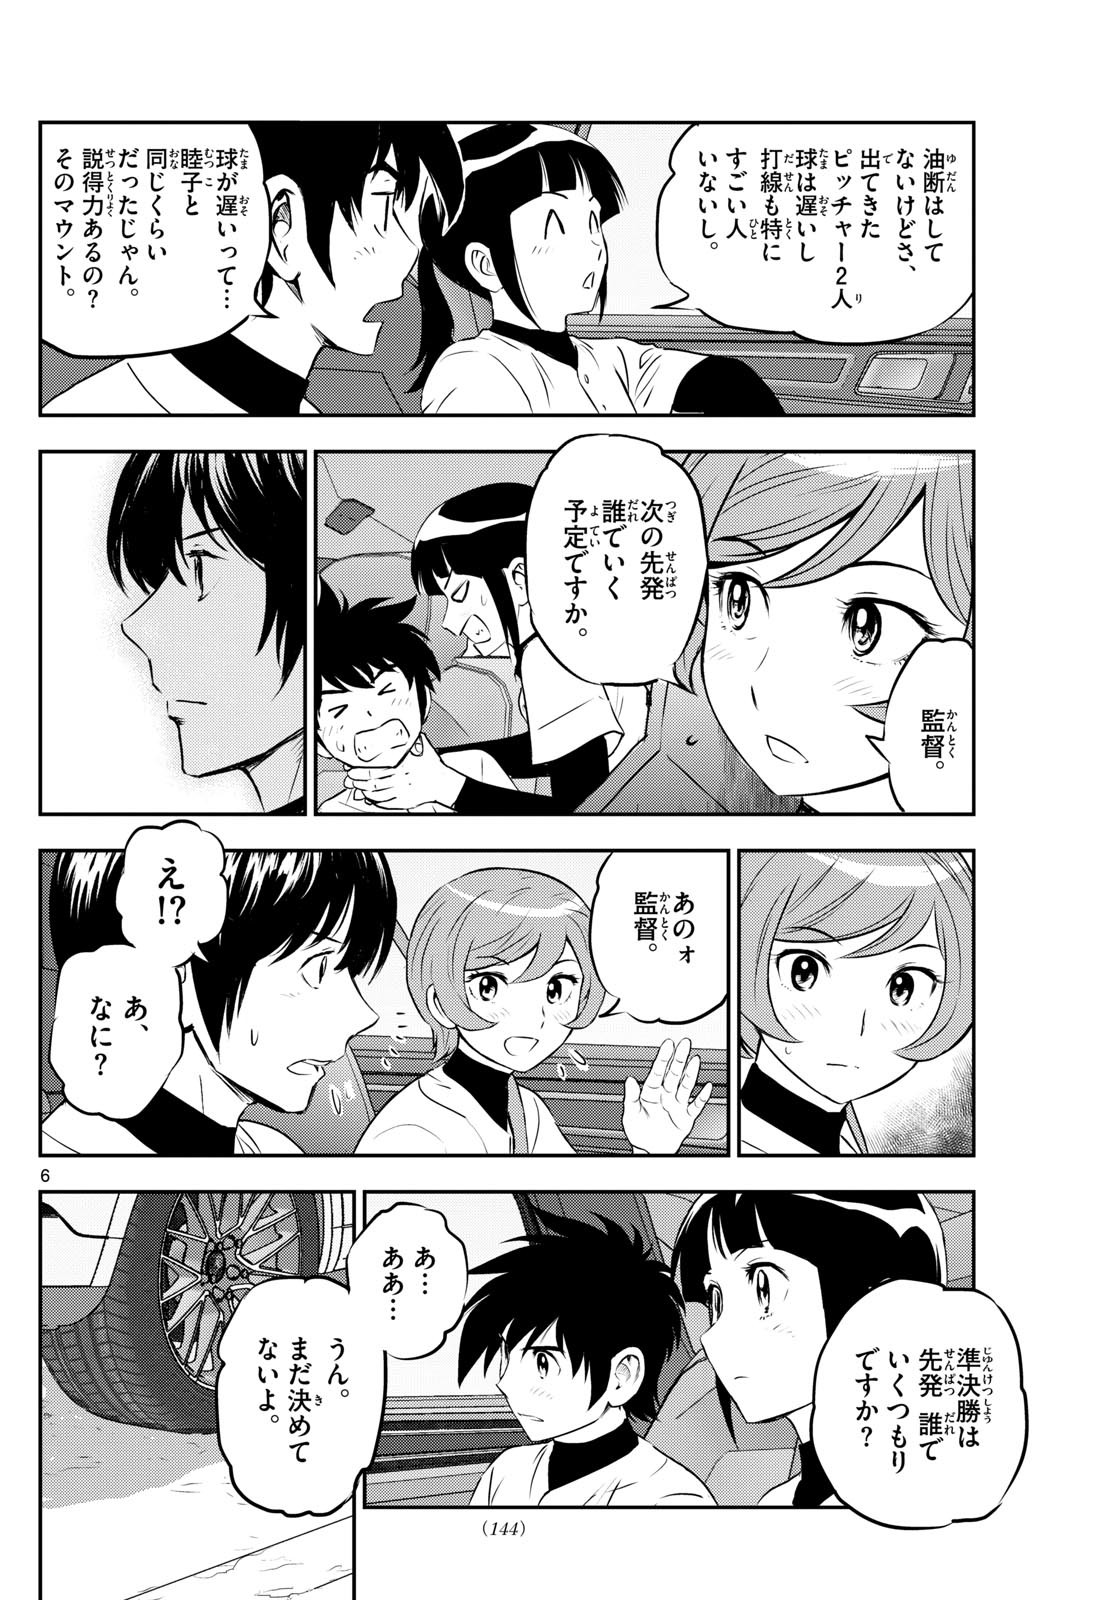 Major 2nd - メジャーセカンド - Chapter 278 - Page 6